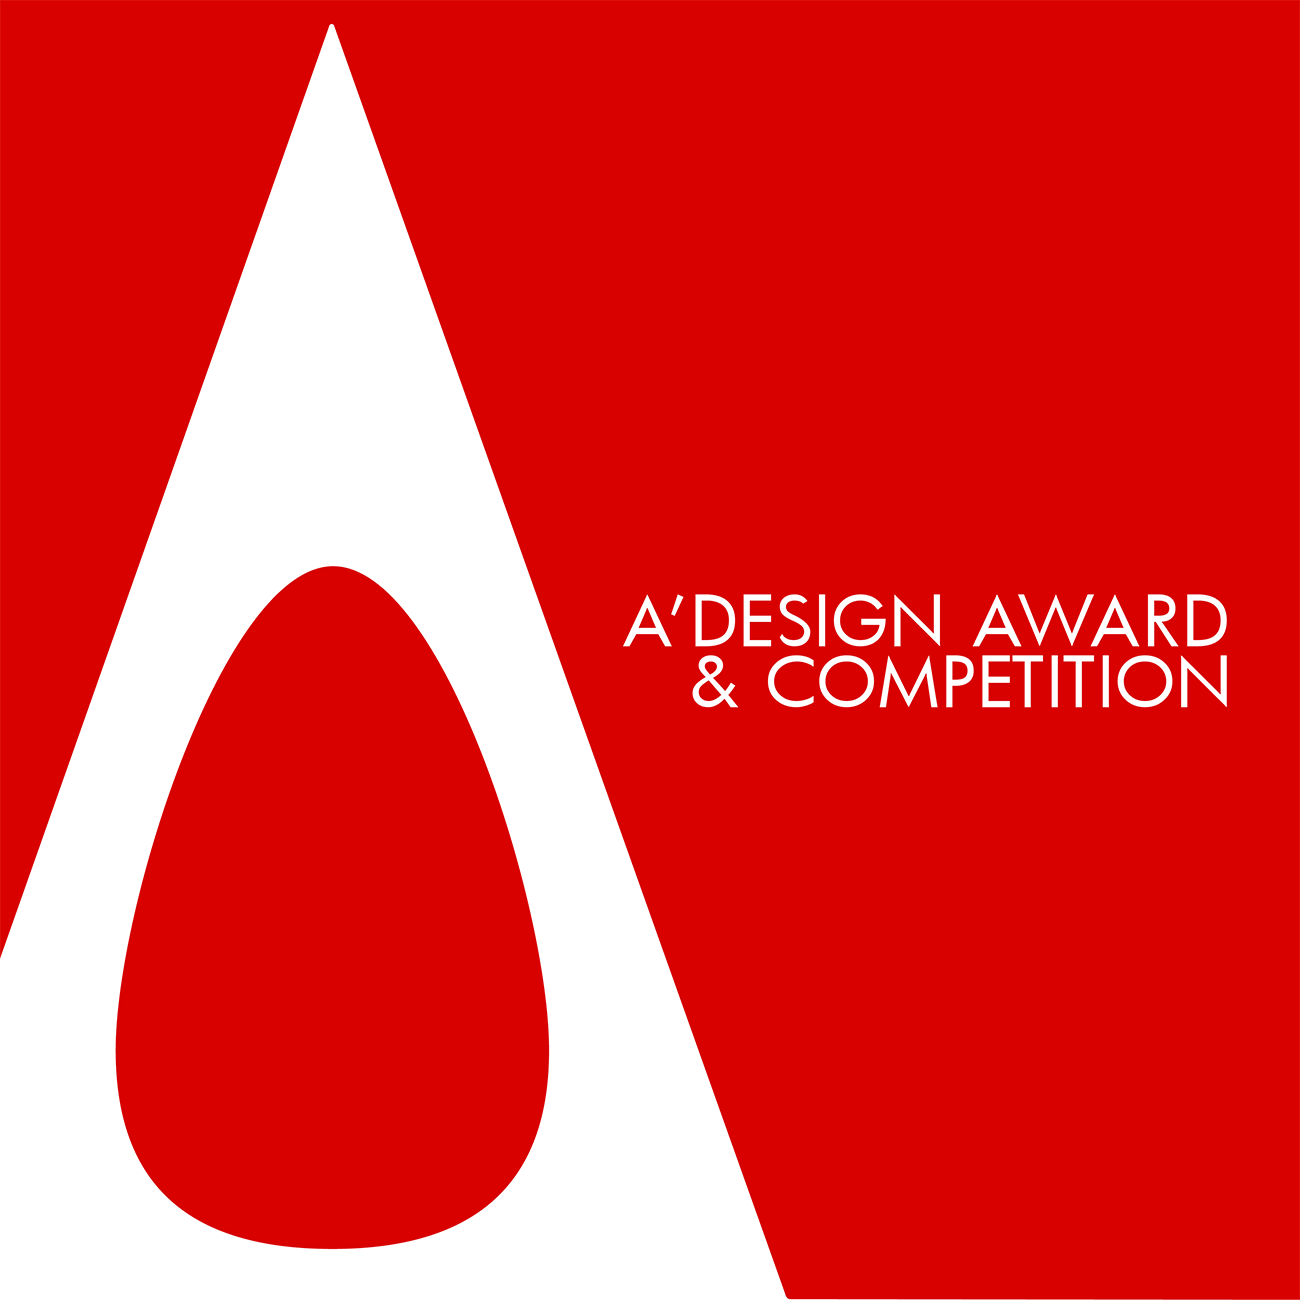 A'Design Awards and Competition LOGO